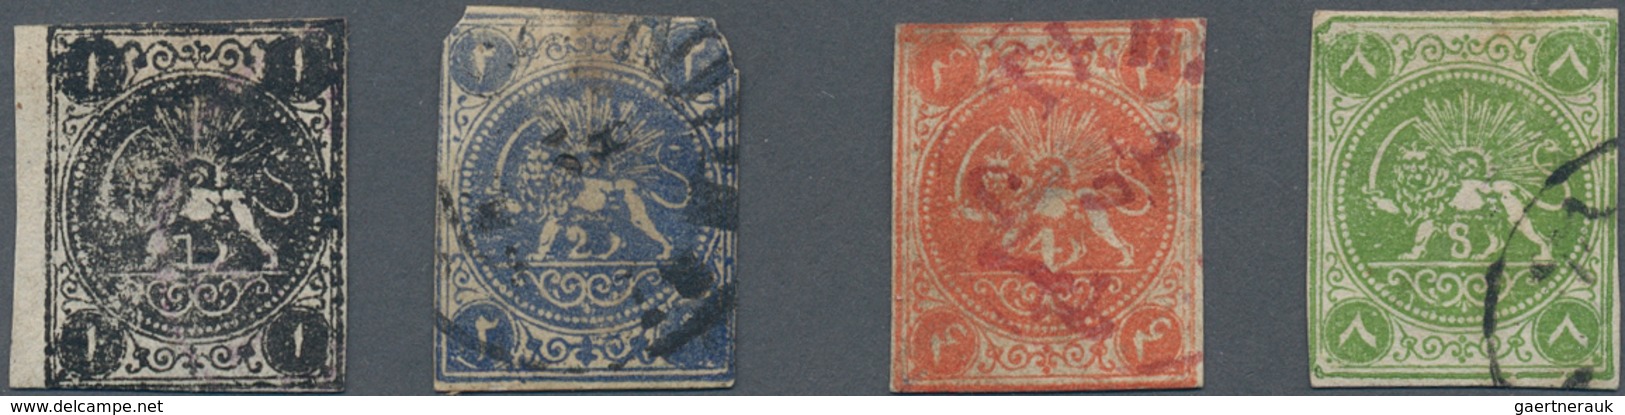 Iran: 1868-78, Lions Issue 21 Stamps Clear Cancelled, Some Faults And Thins, Still Fine For Study - Irán